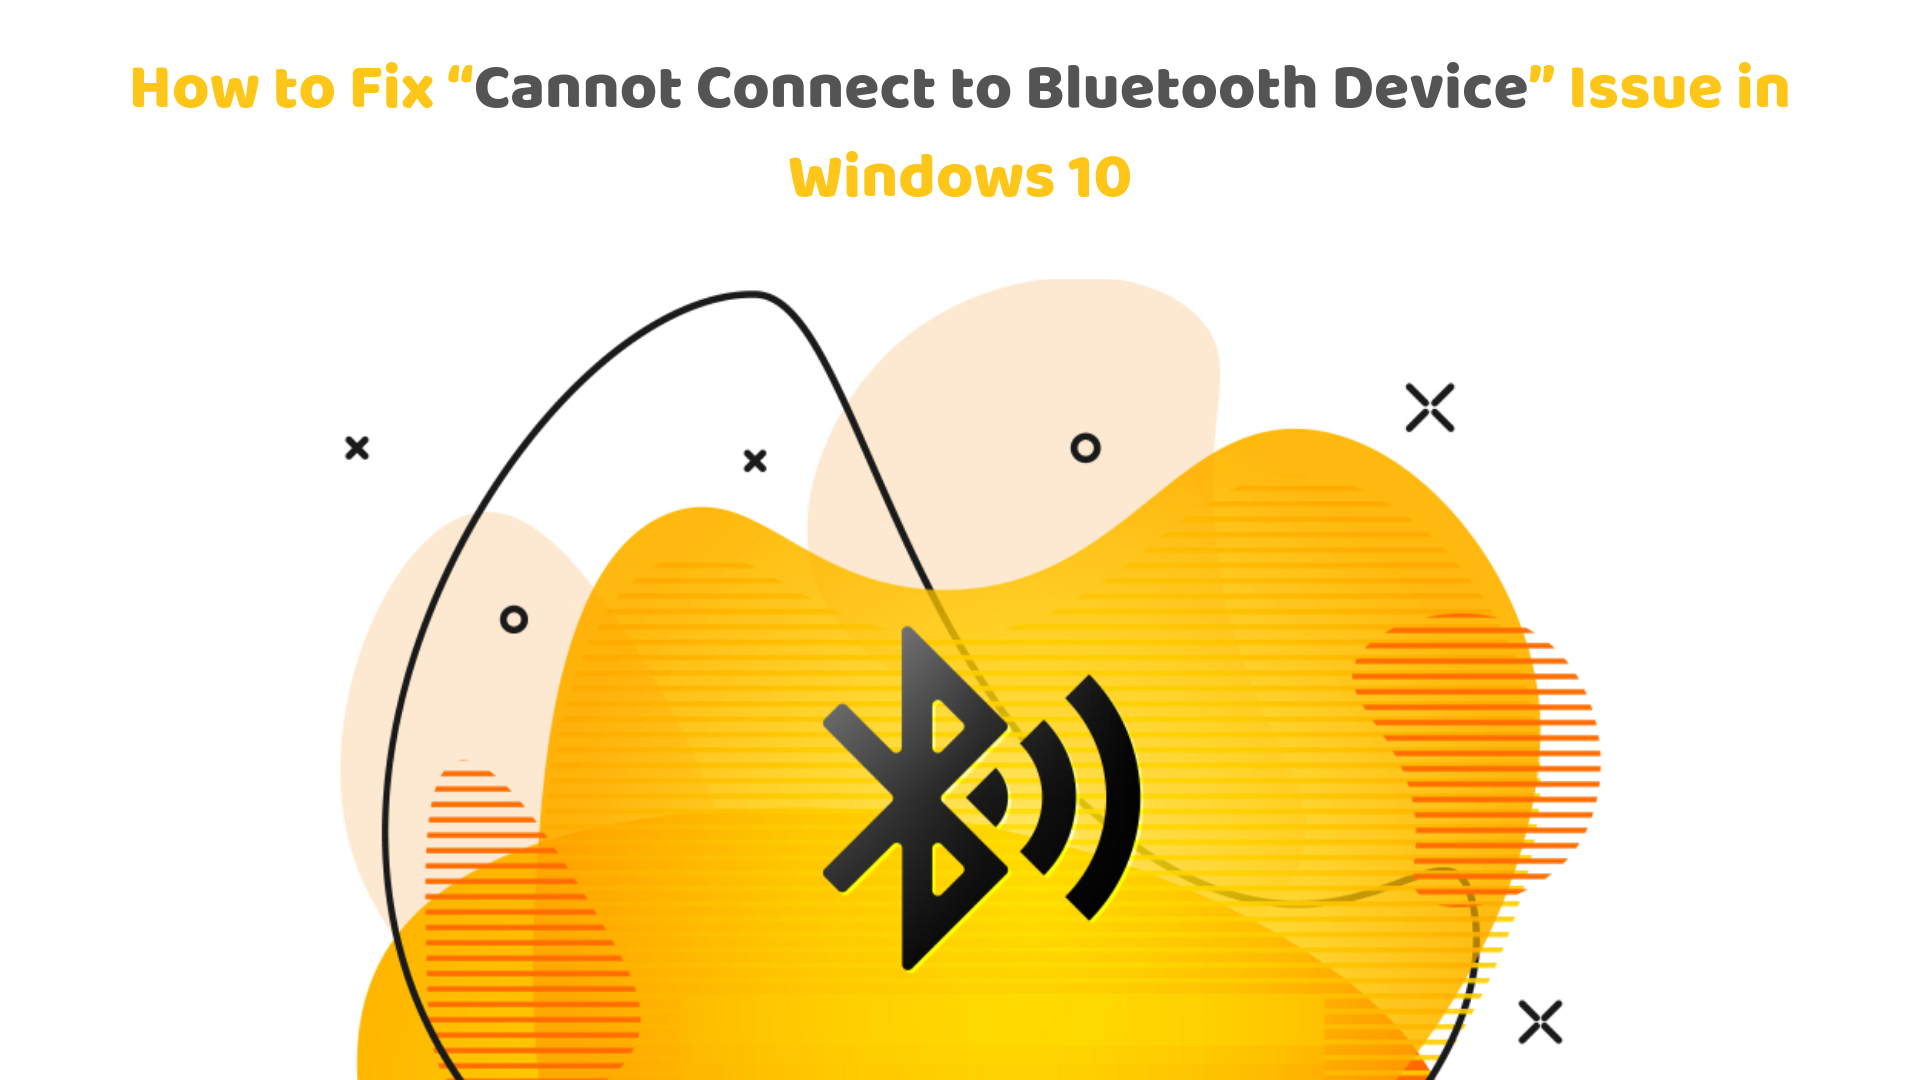 Fix Cannot Connect to Bluetooth Device Issue in Windows